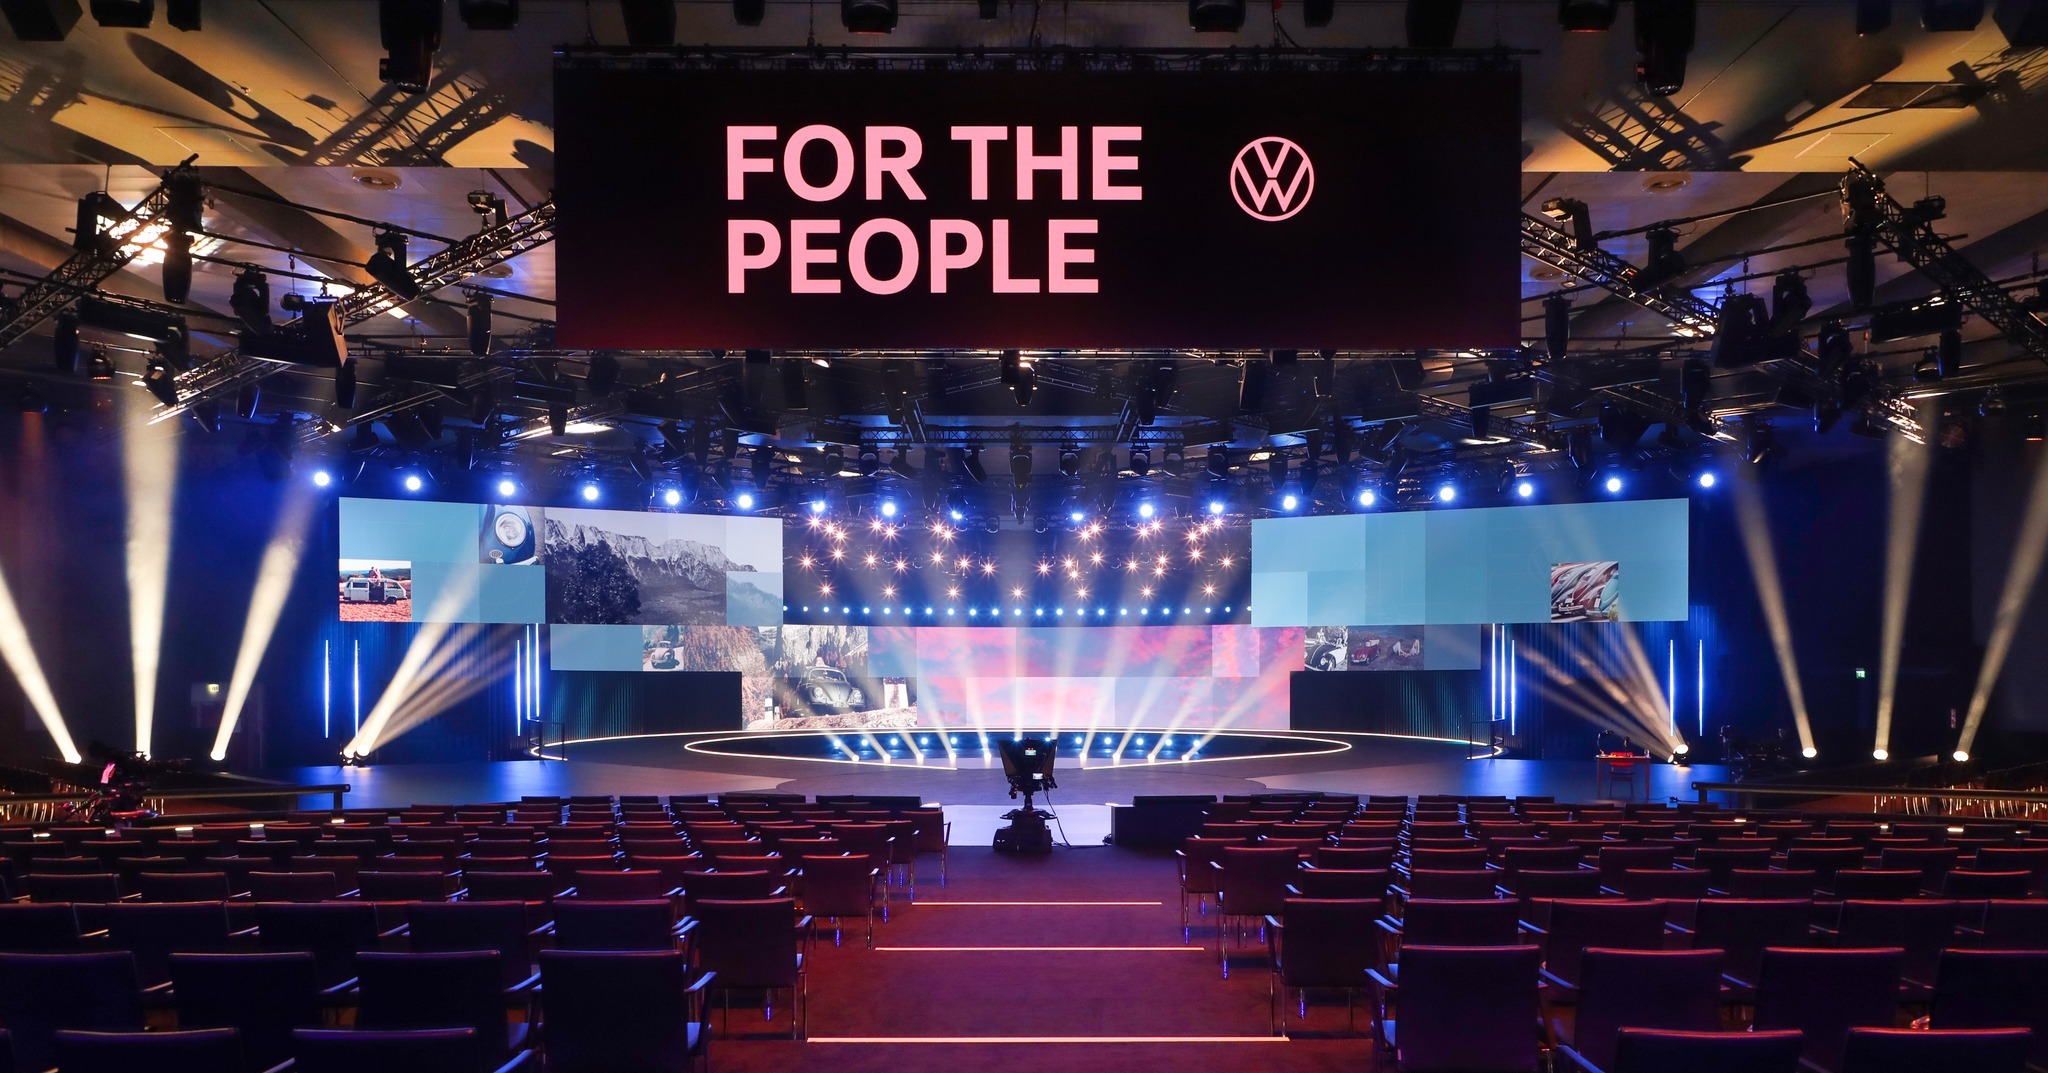 As a leading provider of event technology, PRG provided rigging, lighting, audio and video technology, and intercom technology to celebrate the world premiere of the "ID.2all" show car of VW in Hamburg.